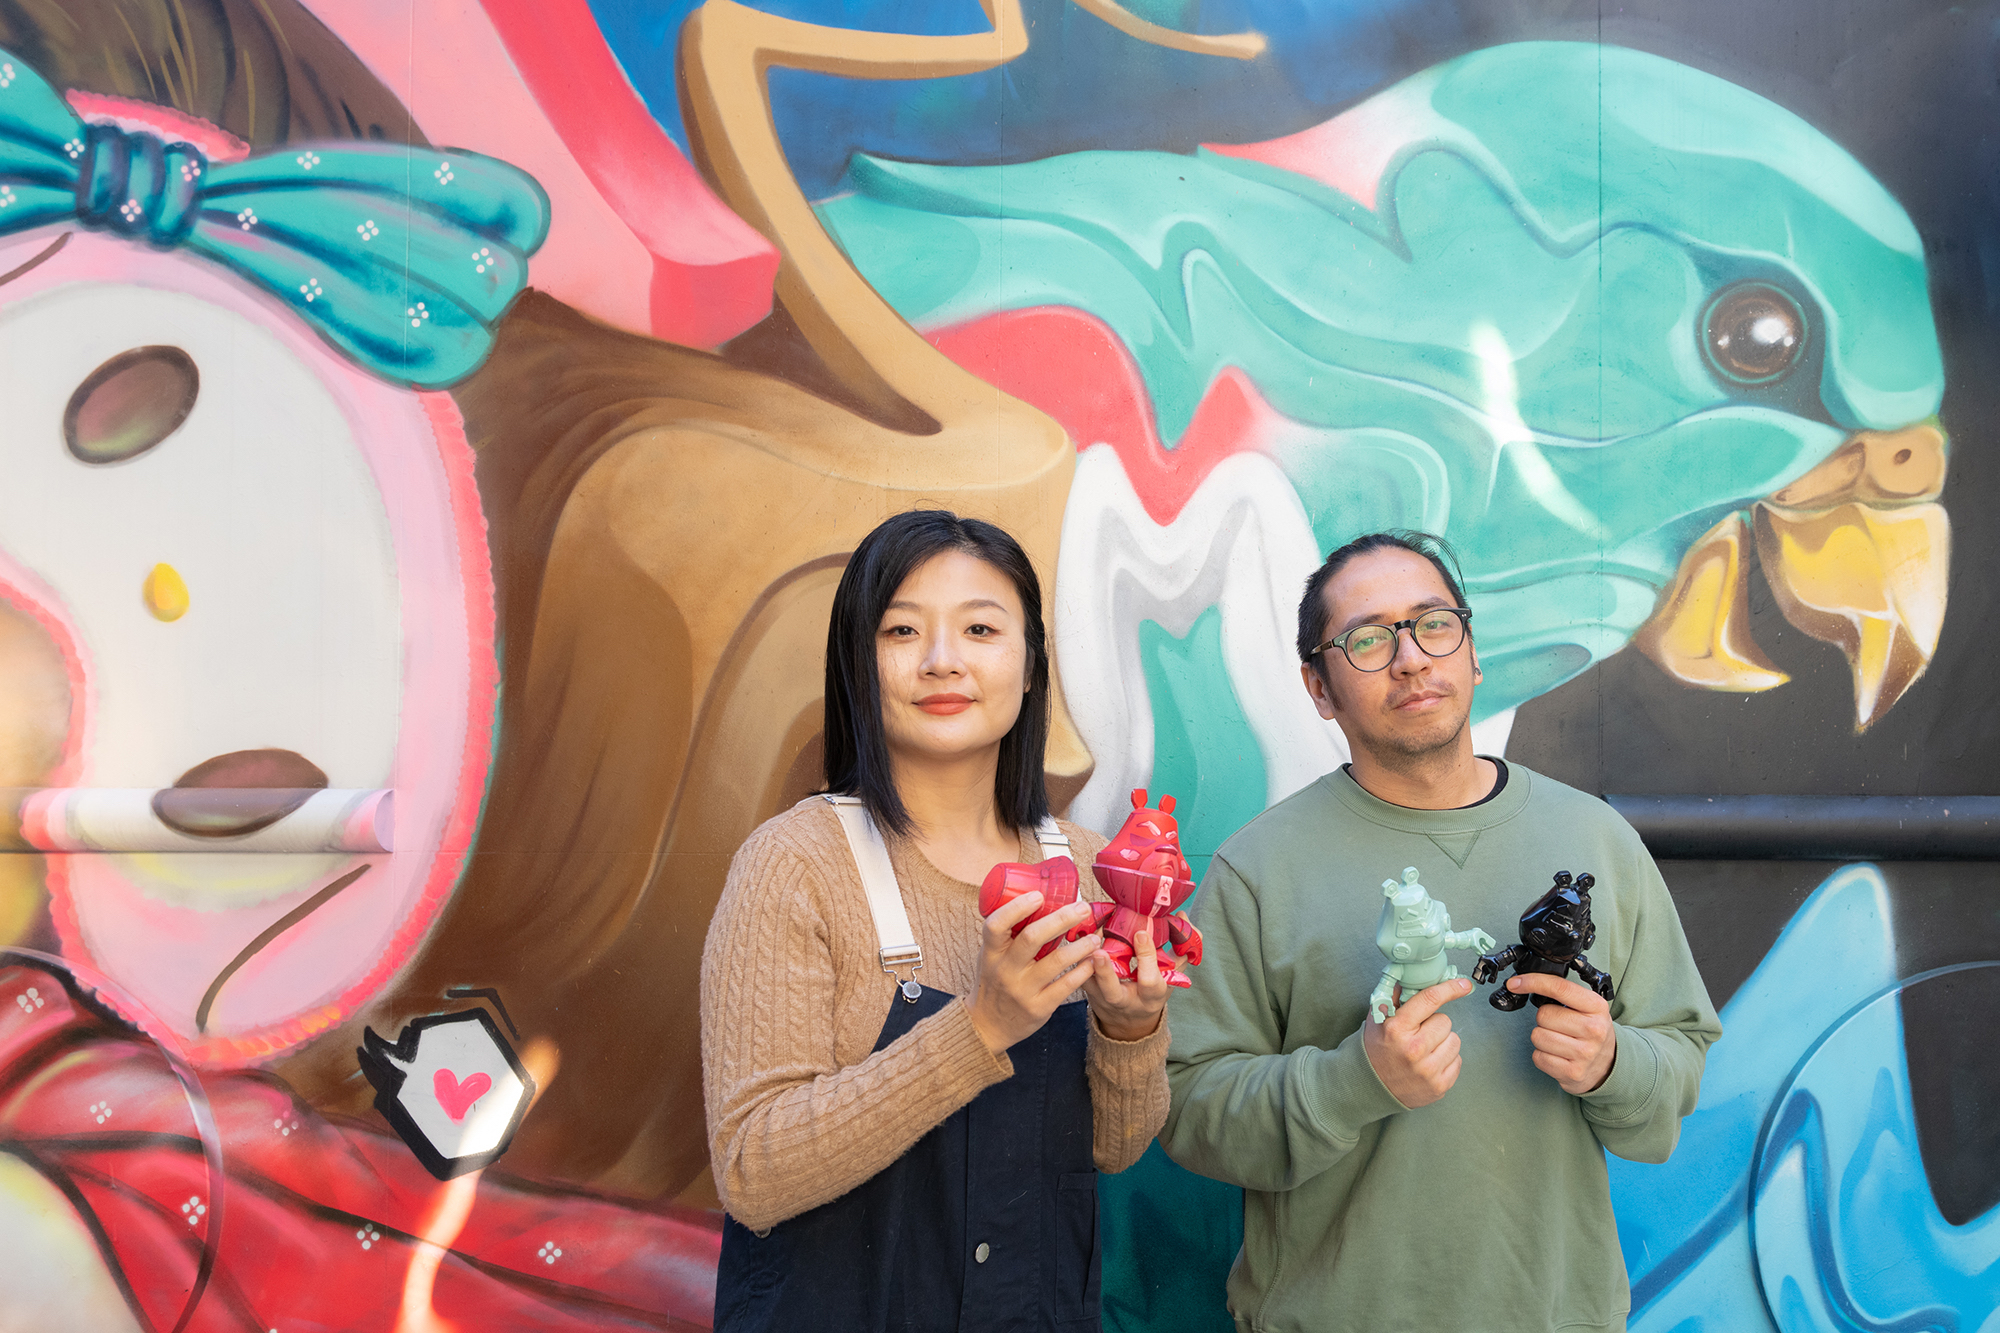 The co-founders of Nativo, Anny Chong (left) and Felipe Wong, have also contributed stunning murals to the city under the alias AAFK